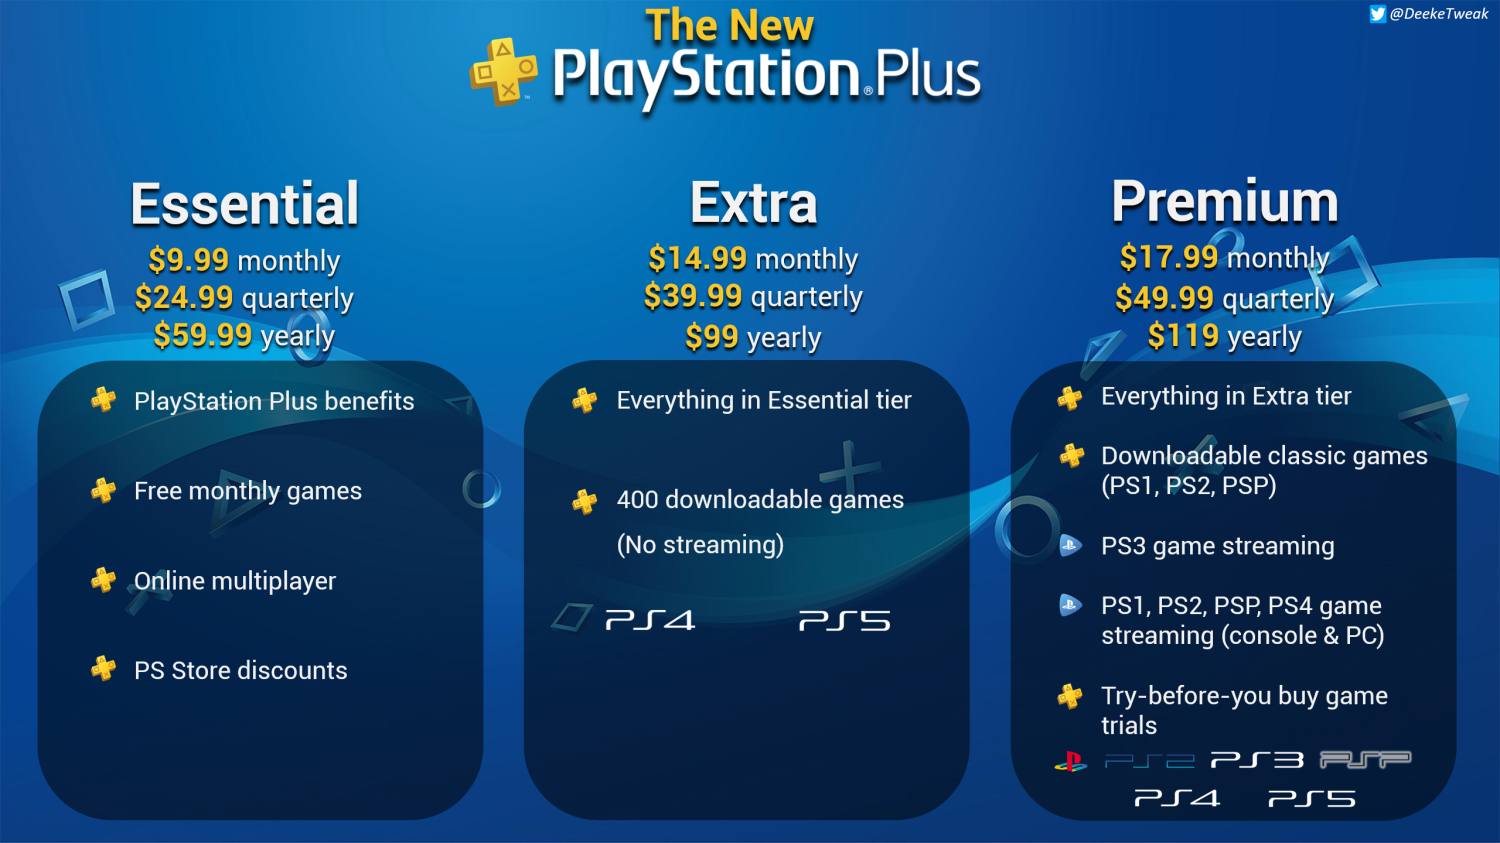 IGN - Sony announced its new PlayStation Plus subscription tiers